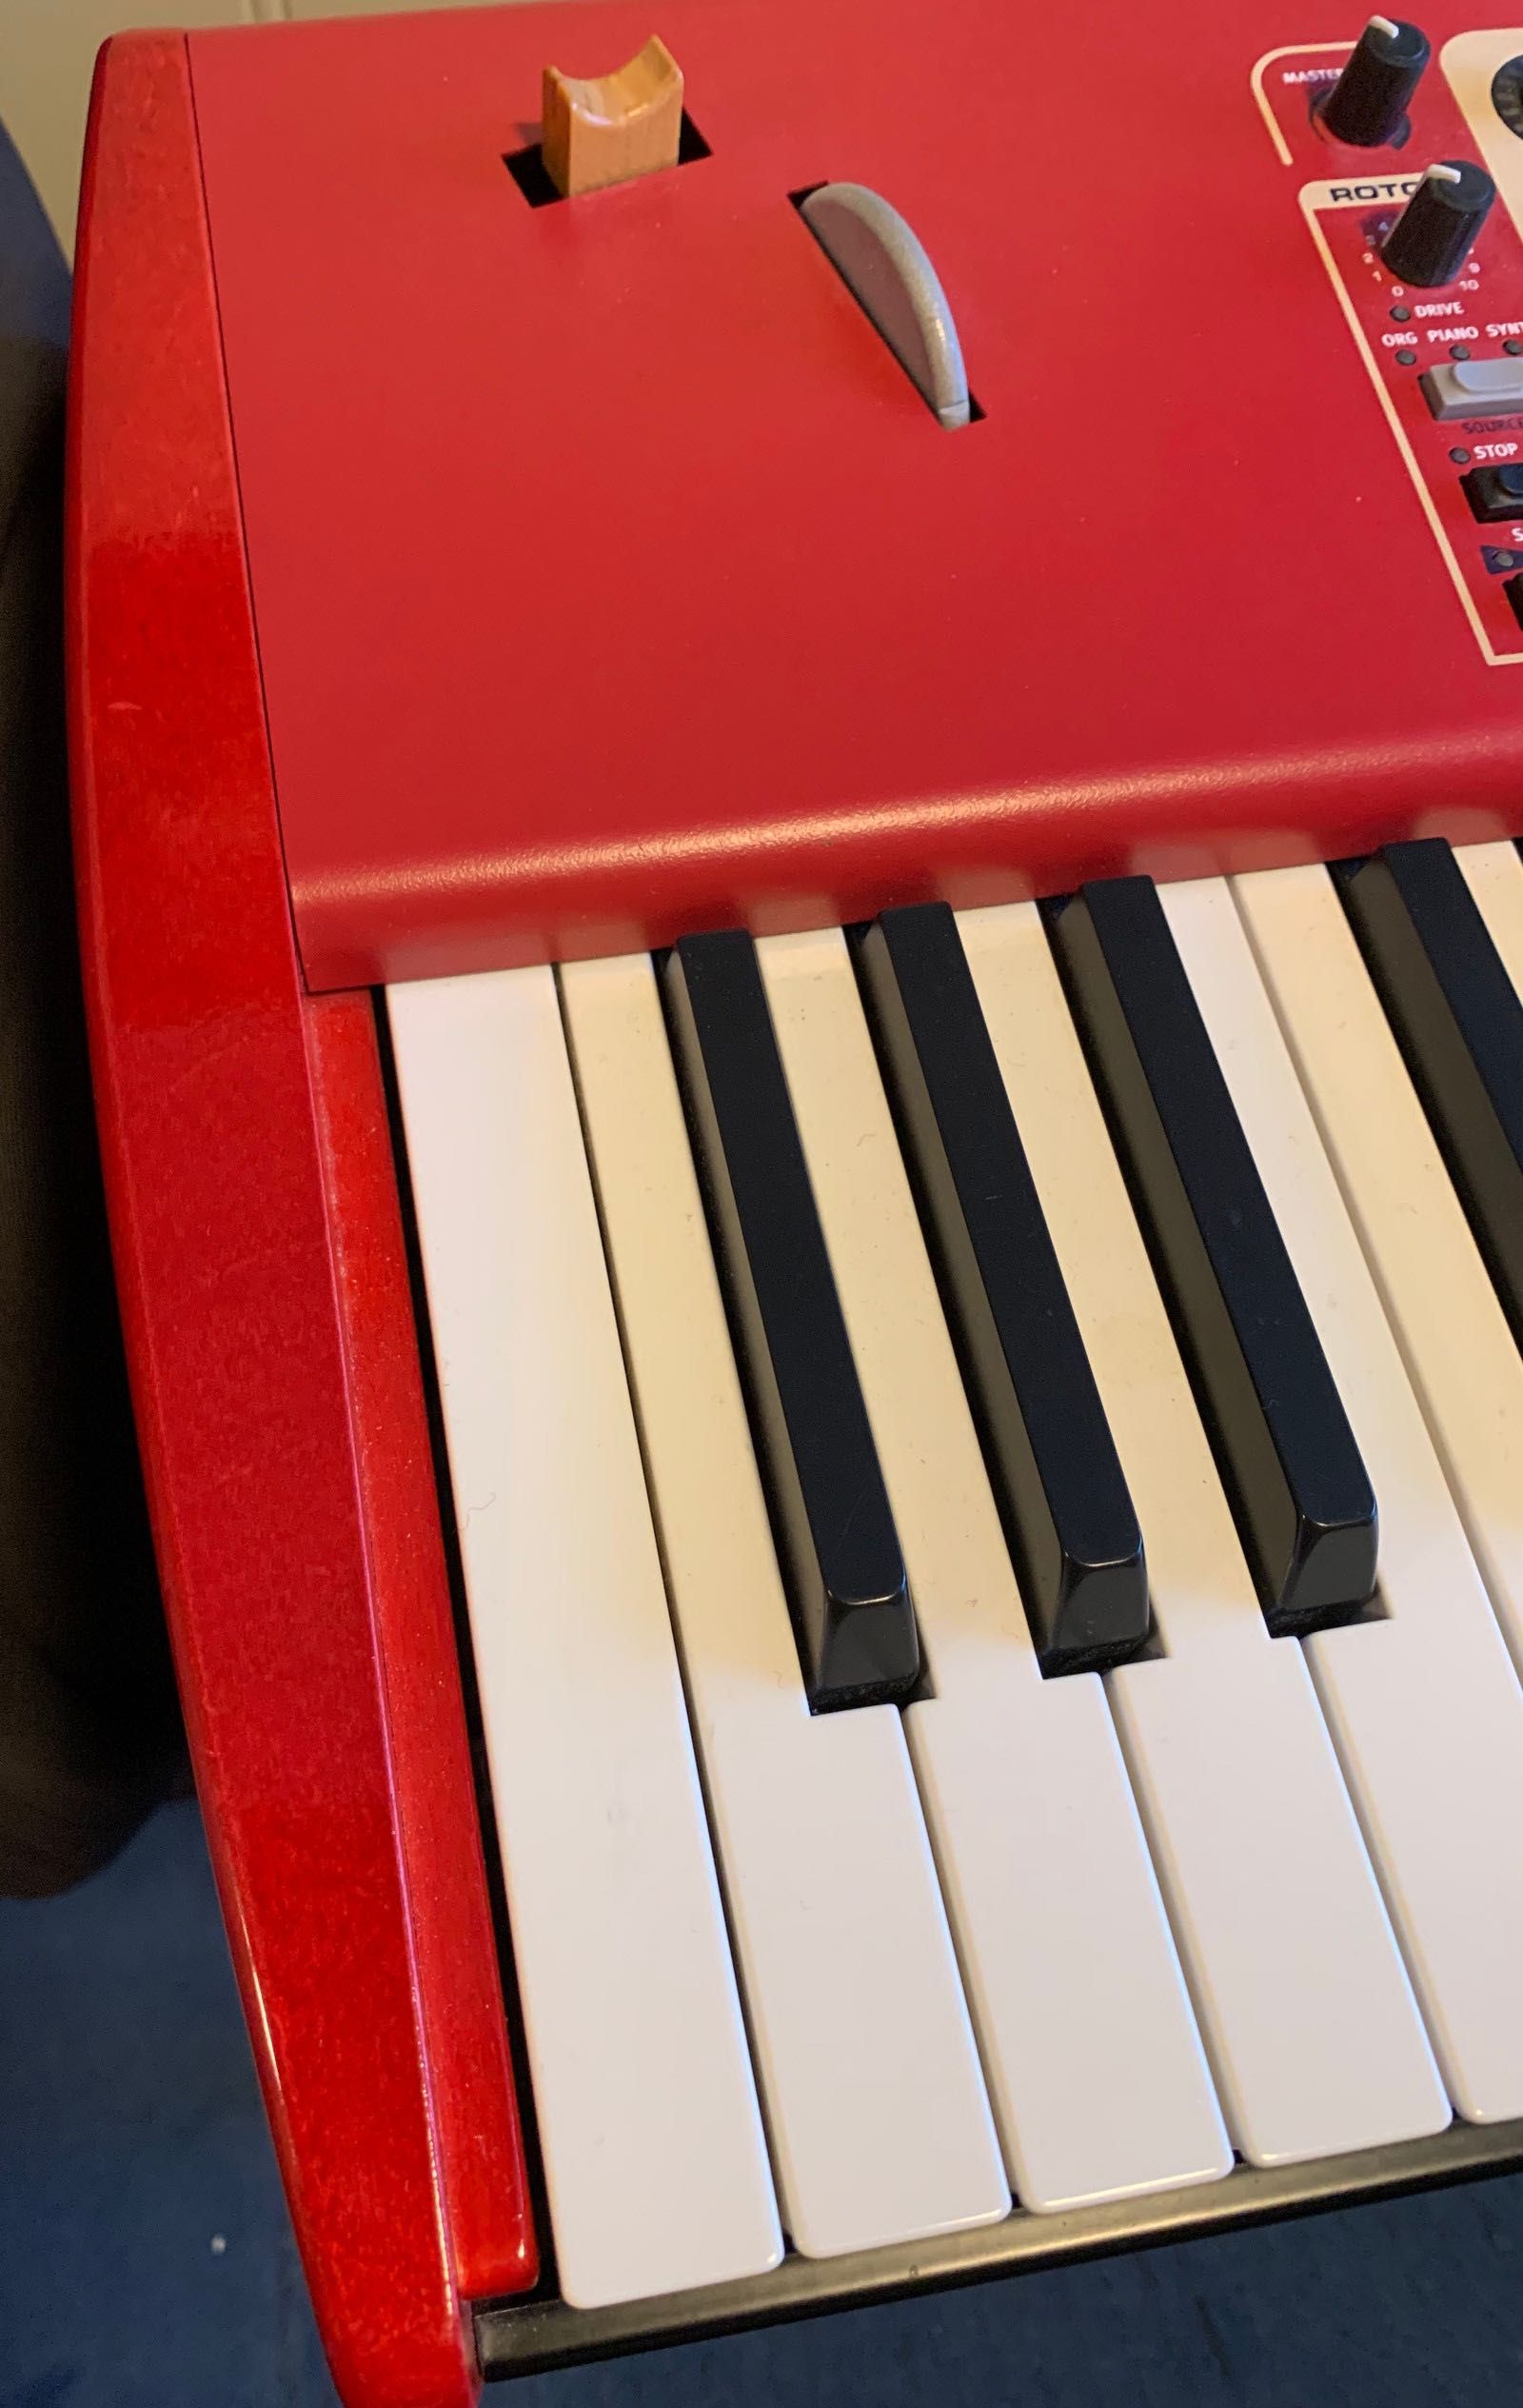 Nord Stage 76 revision B